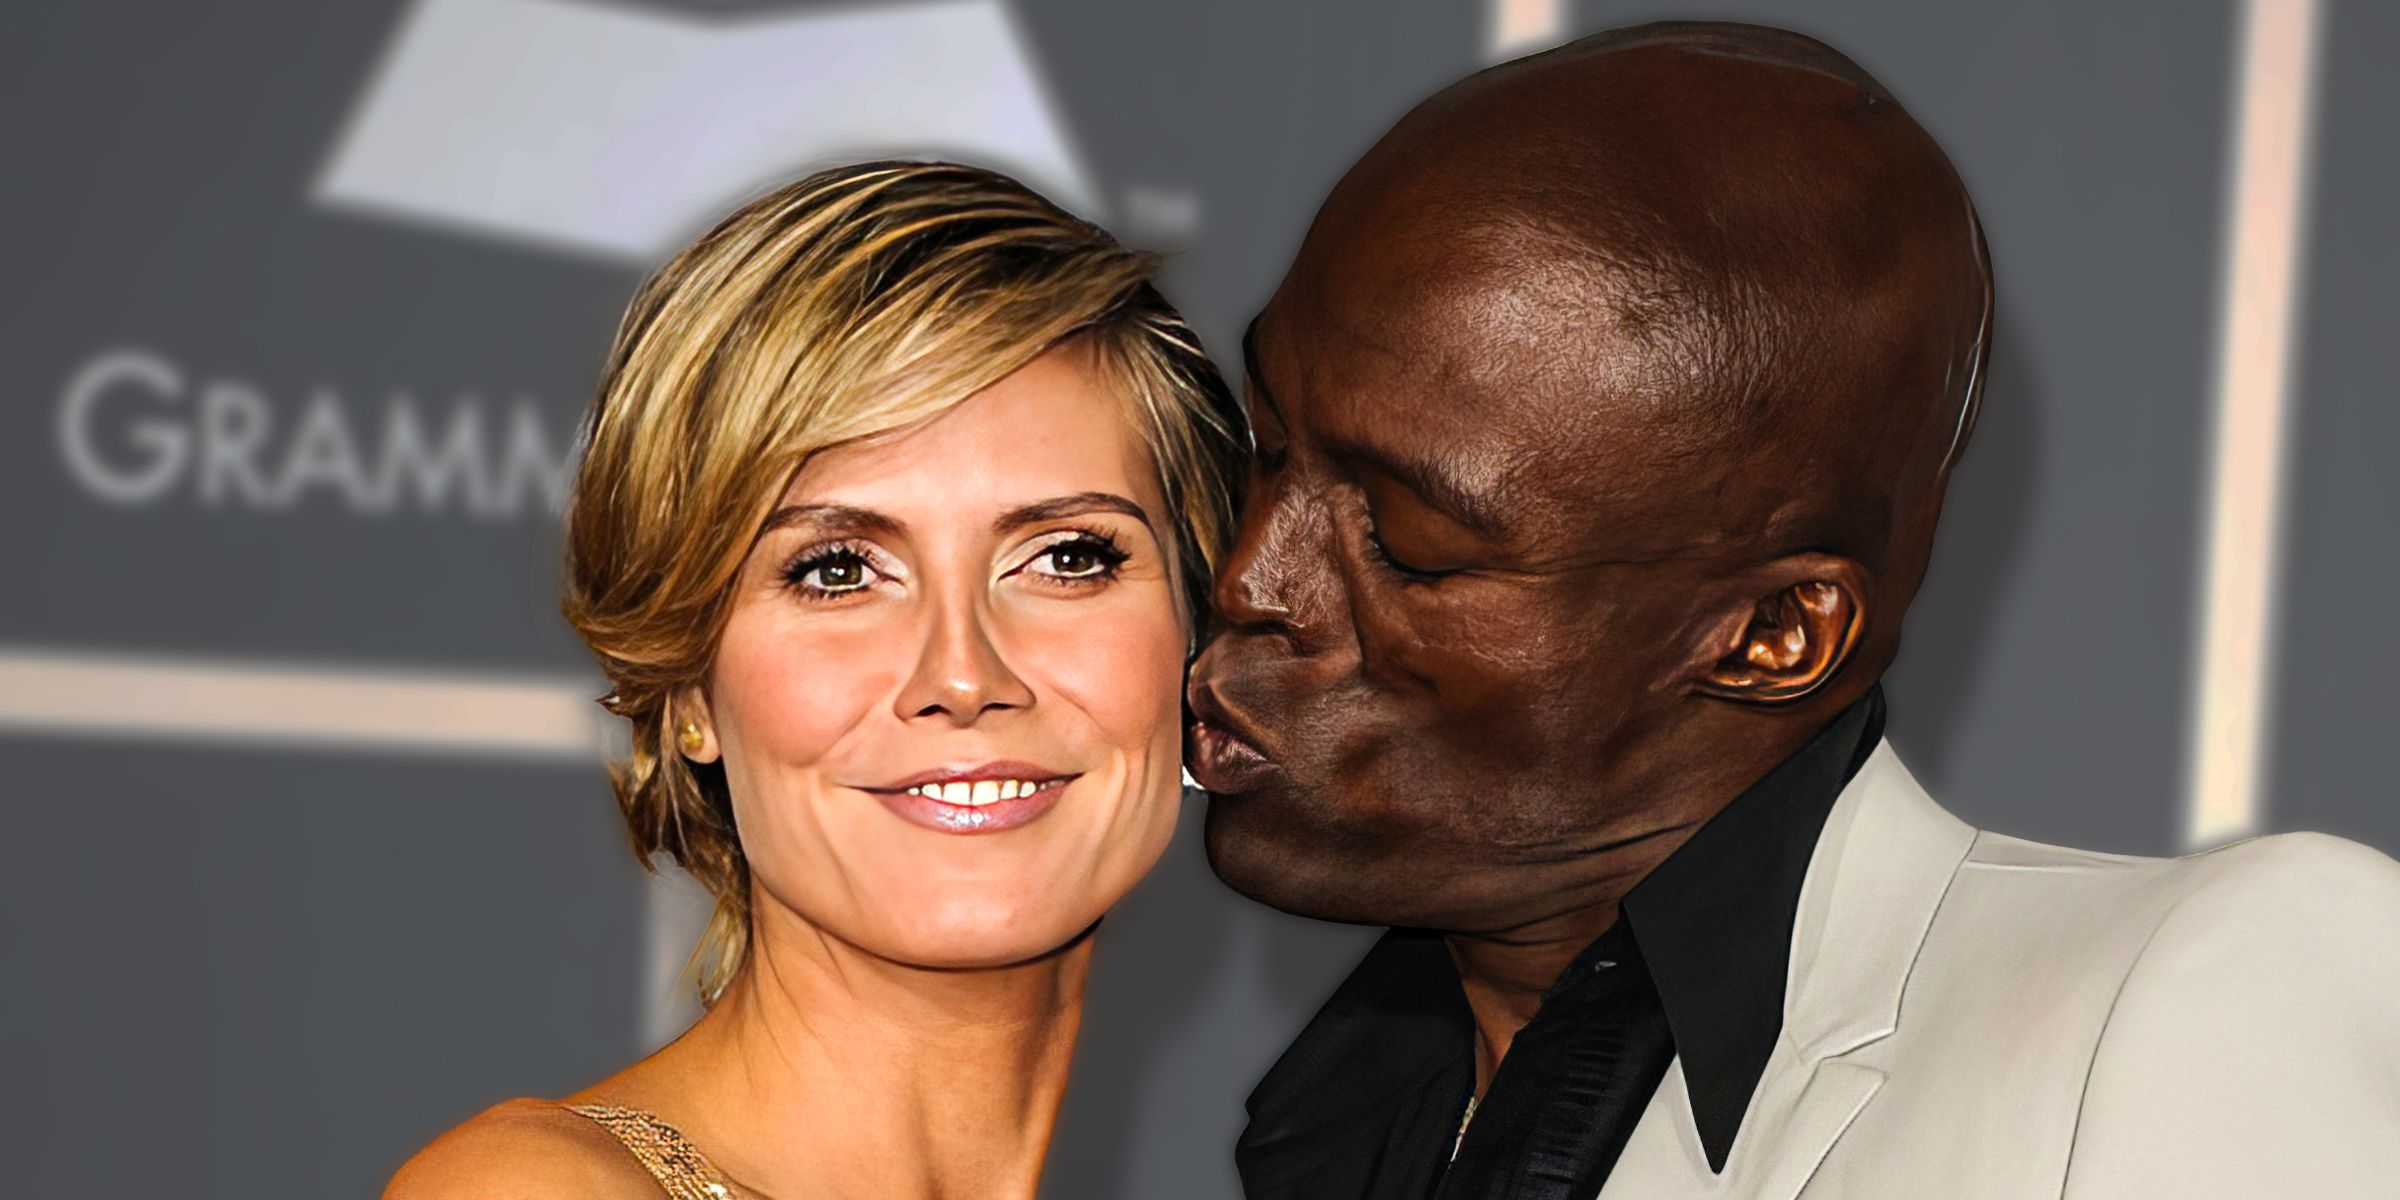 Heidi Klum and Seal | Source: Getty Images